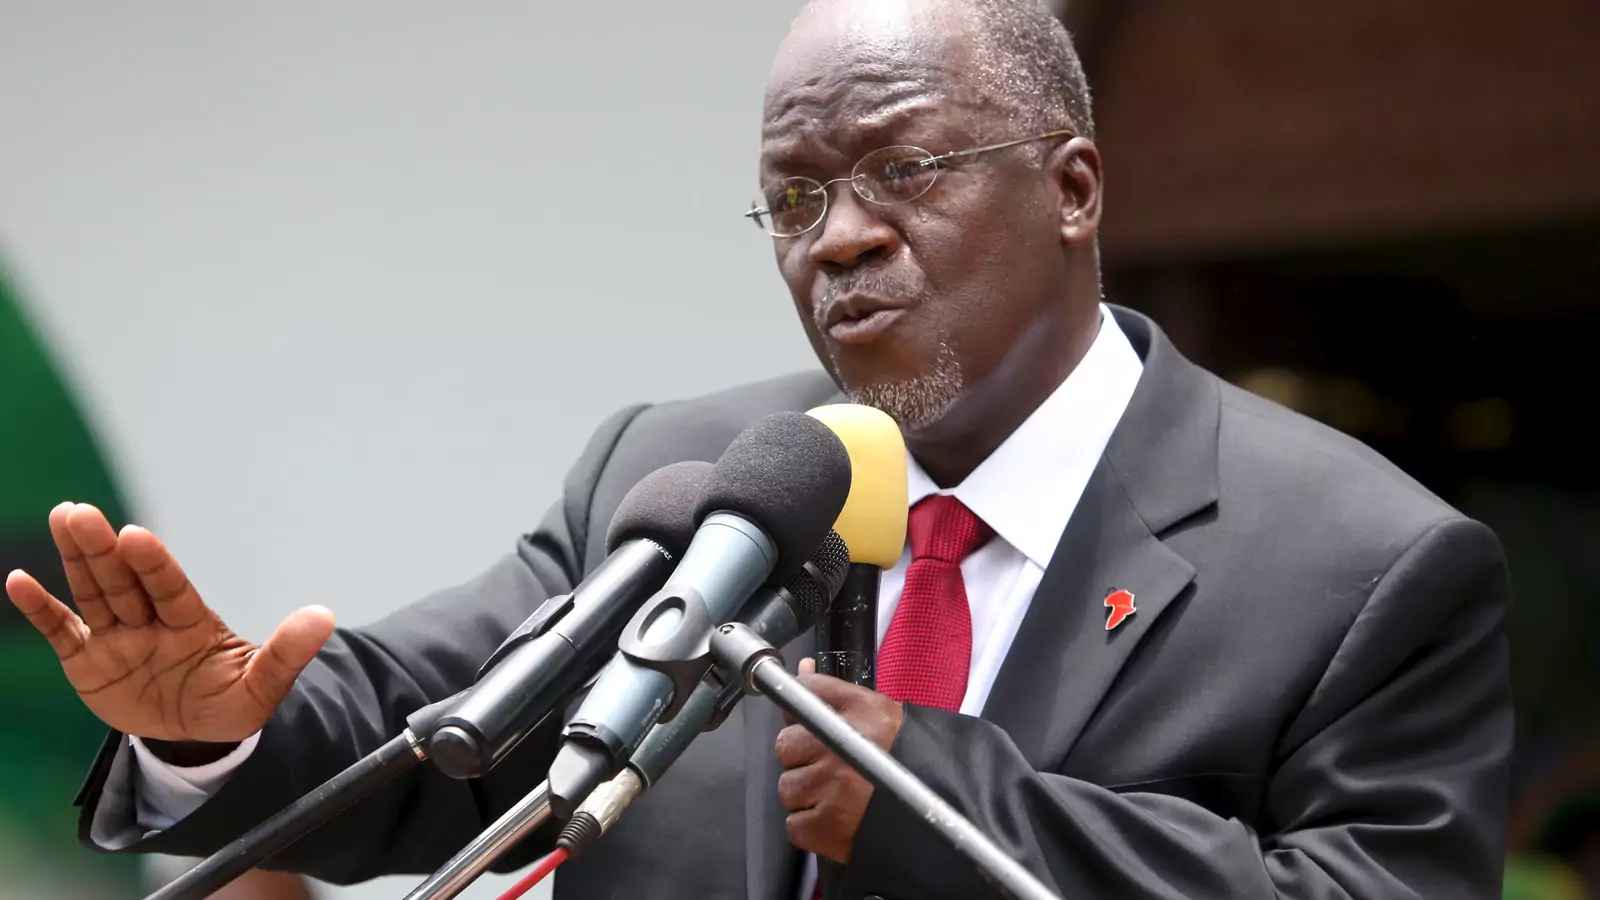 Tanzania's President John Magufuli addresses members of the ruling Chama Cha Mapinduzi Party (CCM) at the party's sub-head office on Lumumba road in Dar es Salaam, October 30, 2015